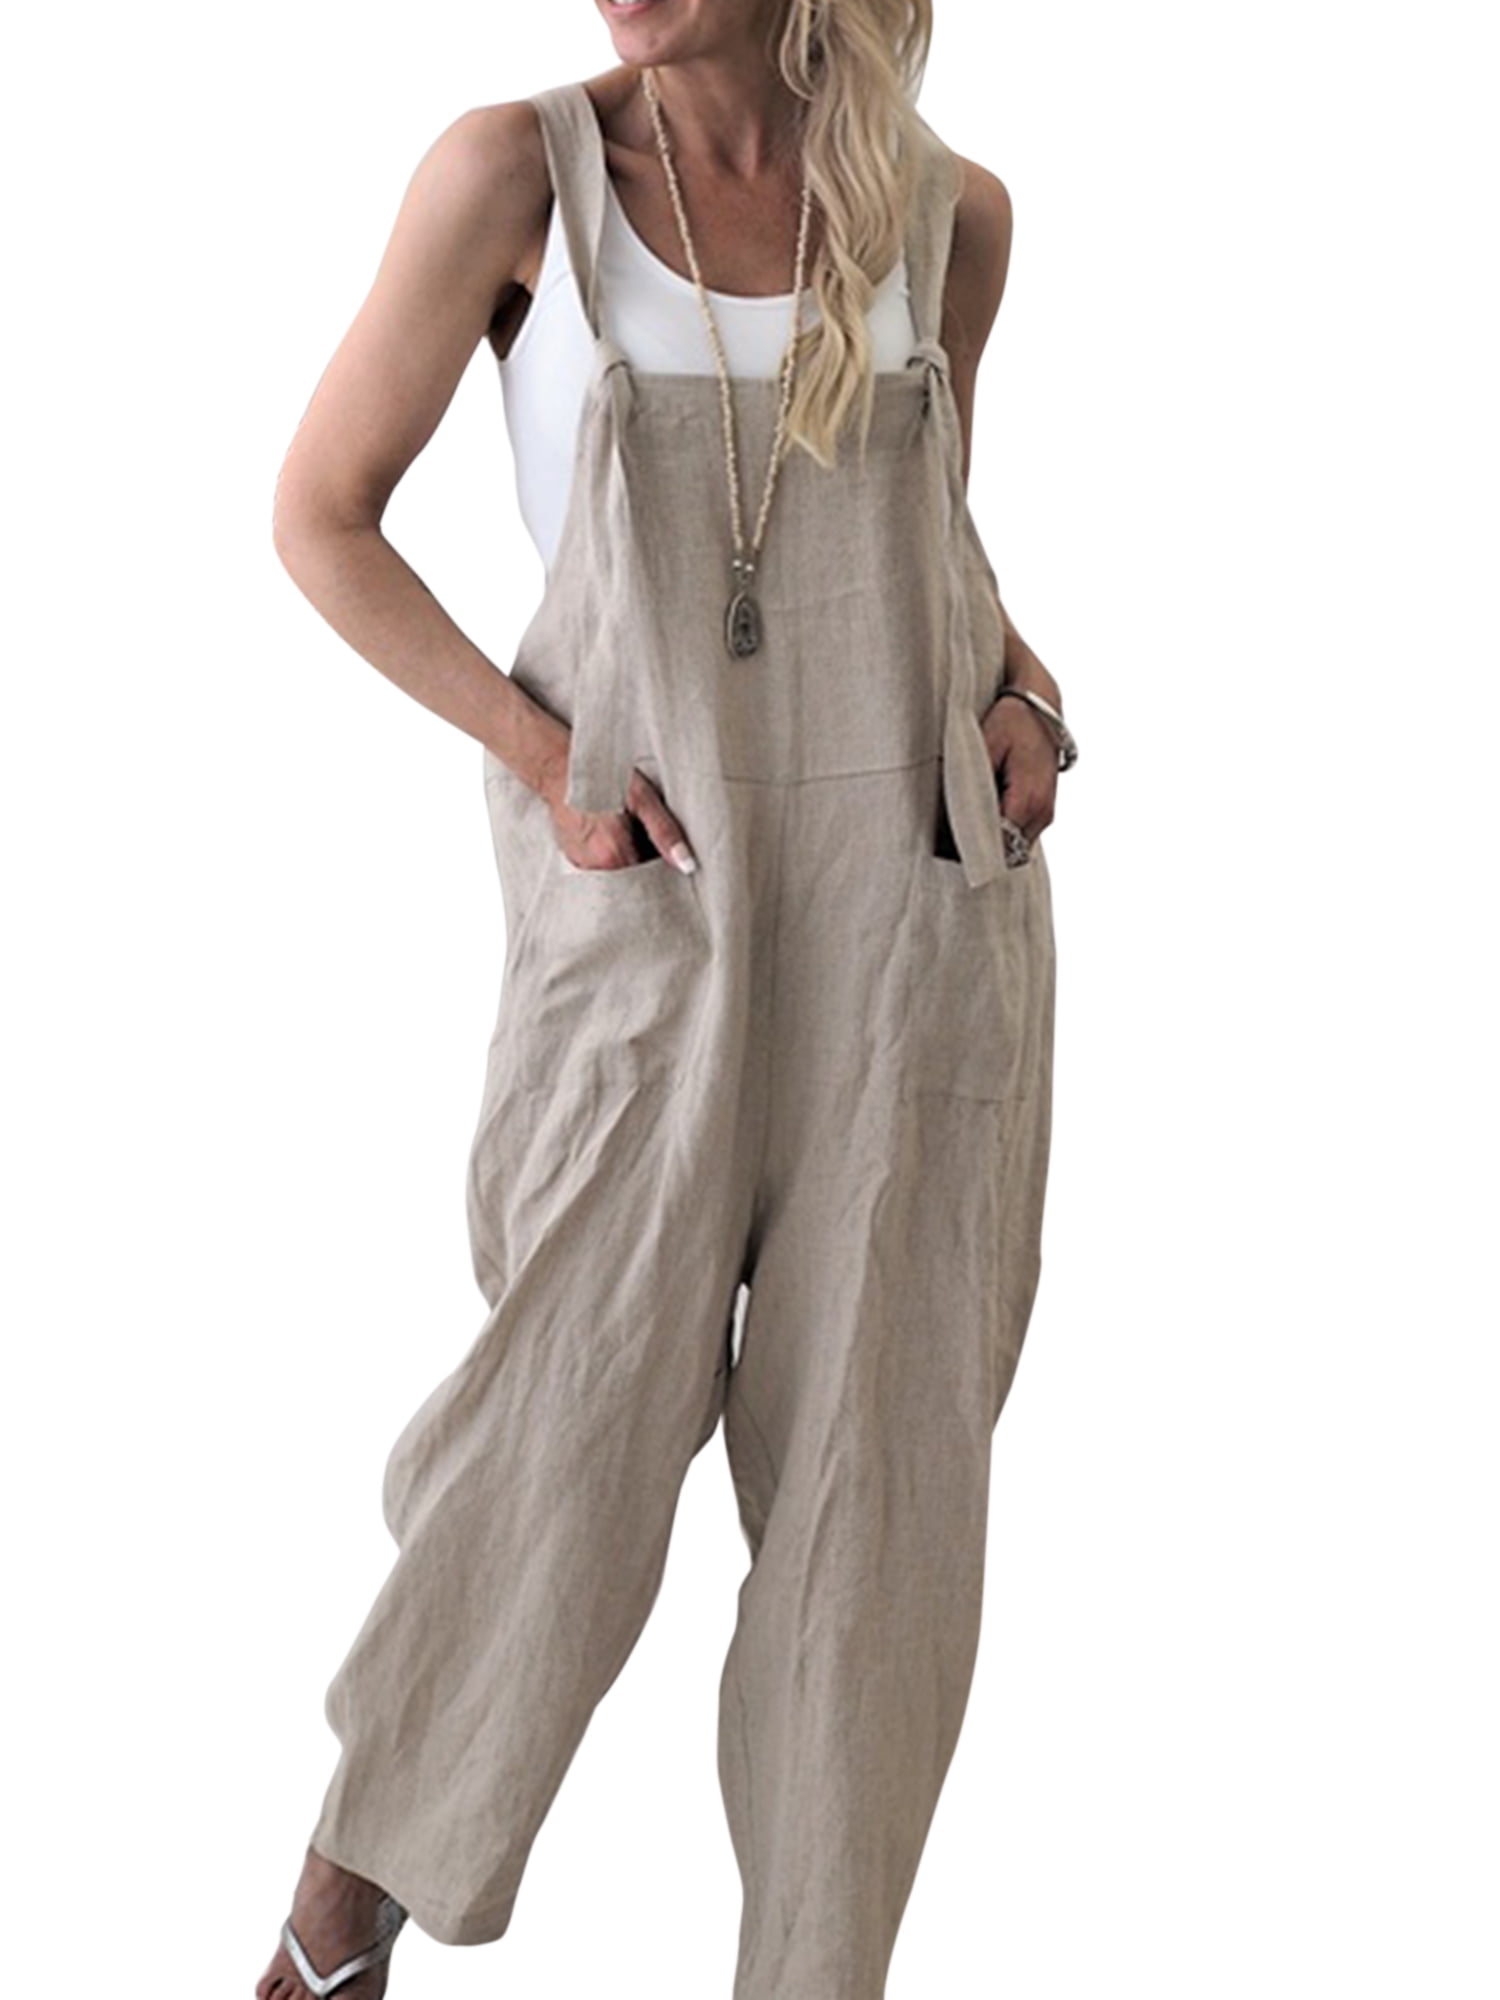 Ladies Casual Straps Overalls Trousers Ladies Sleeveless Baggy Pockets ...